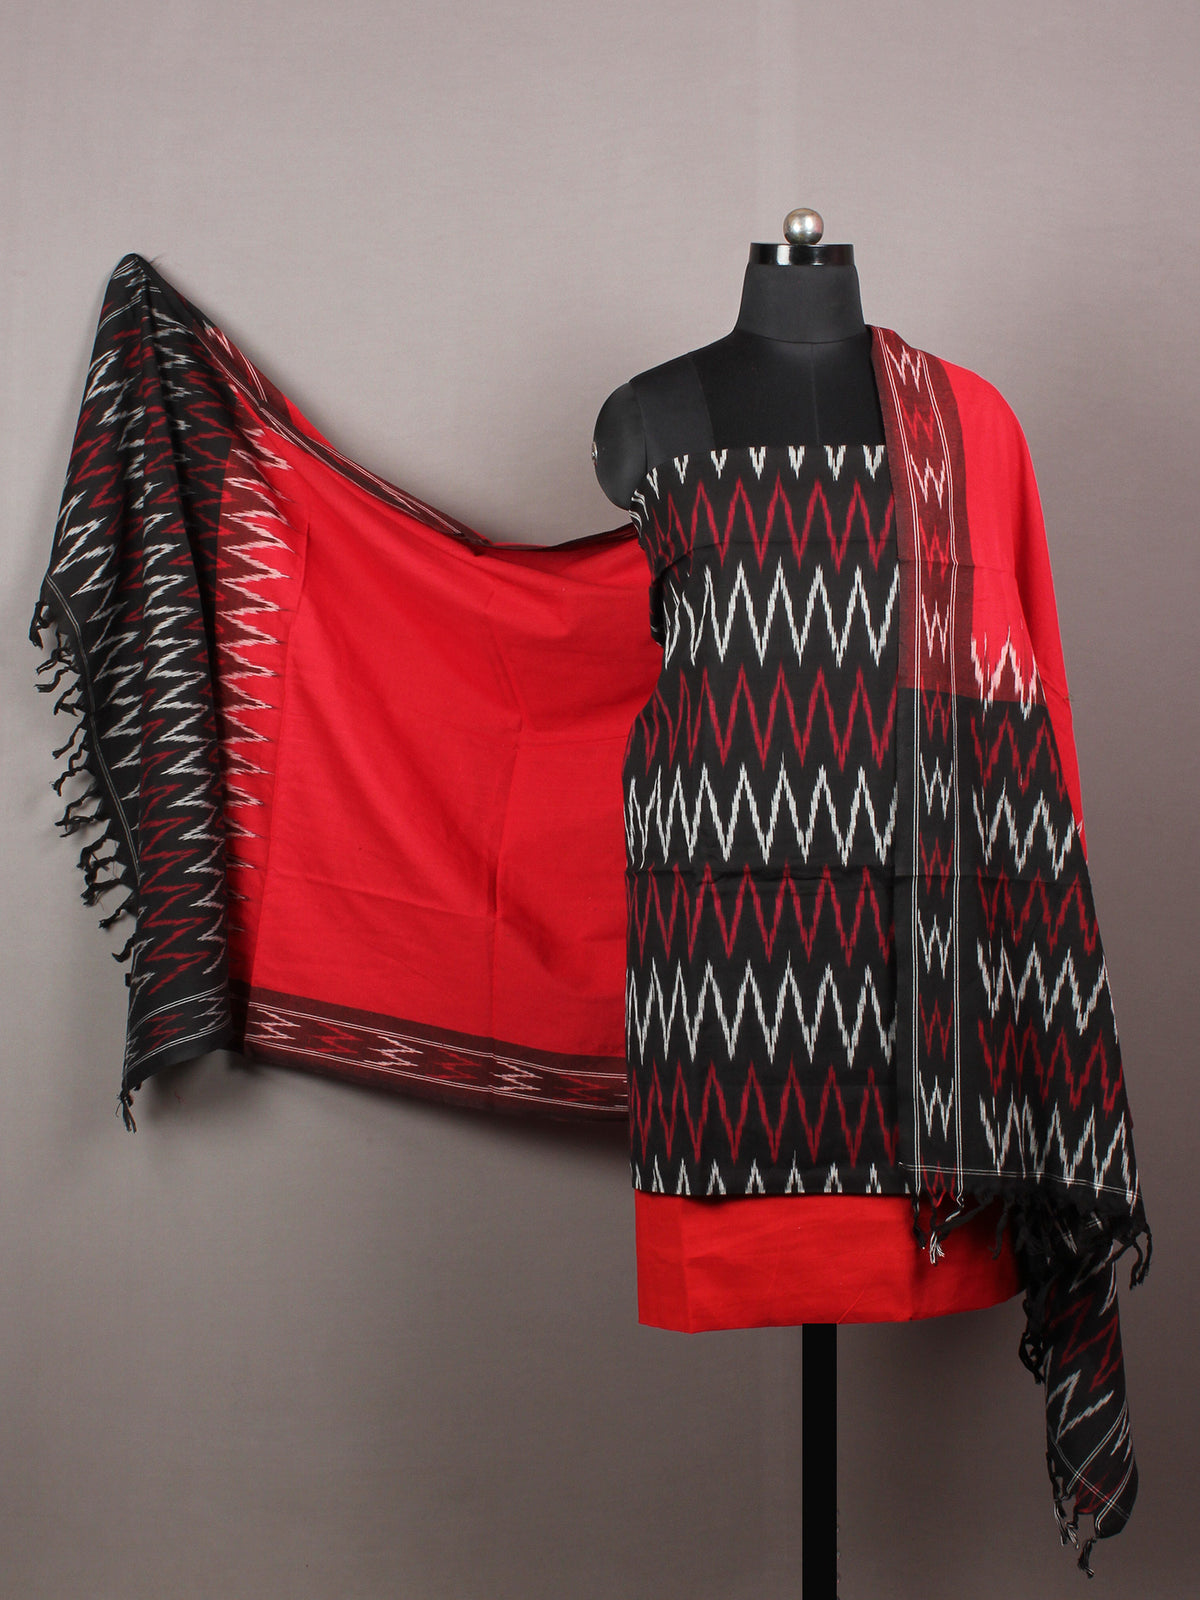 Red Black White Ikat Handwoven Cotton Suit Fabric Set of 3 - S1002030